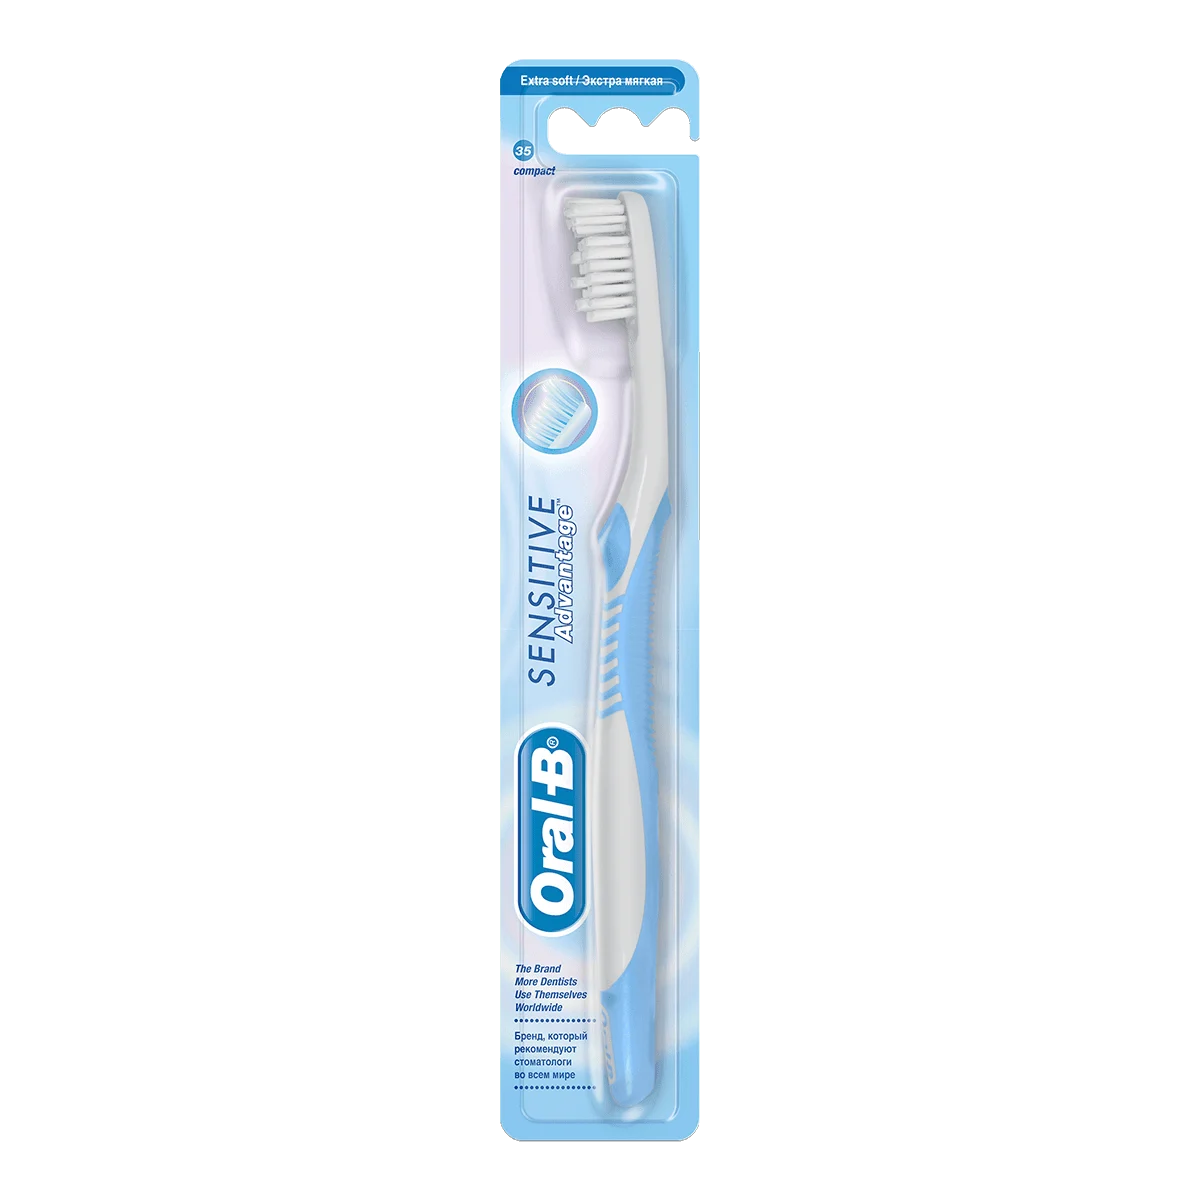 Oral-B Advantage Sensitive Manual Toothbrush undefined